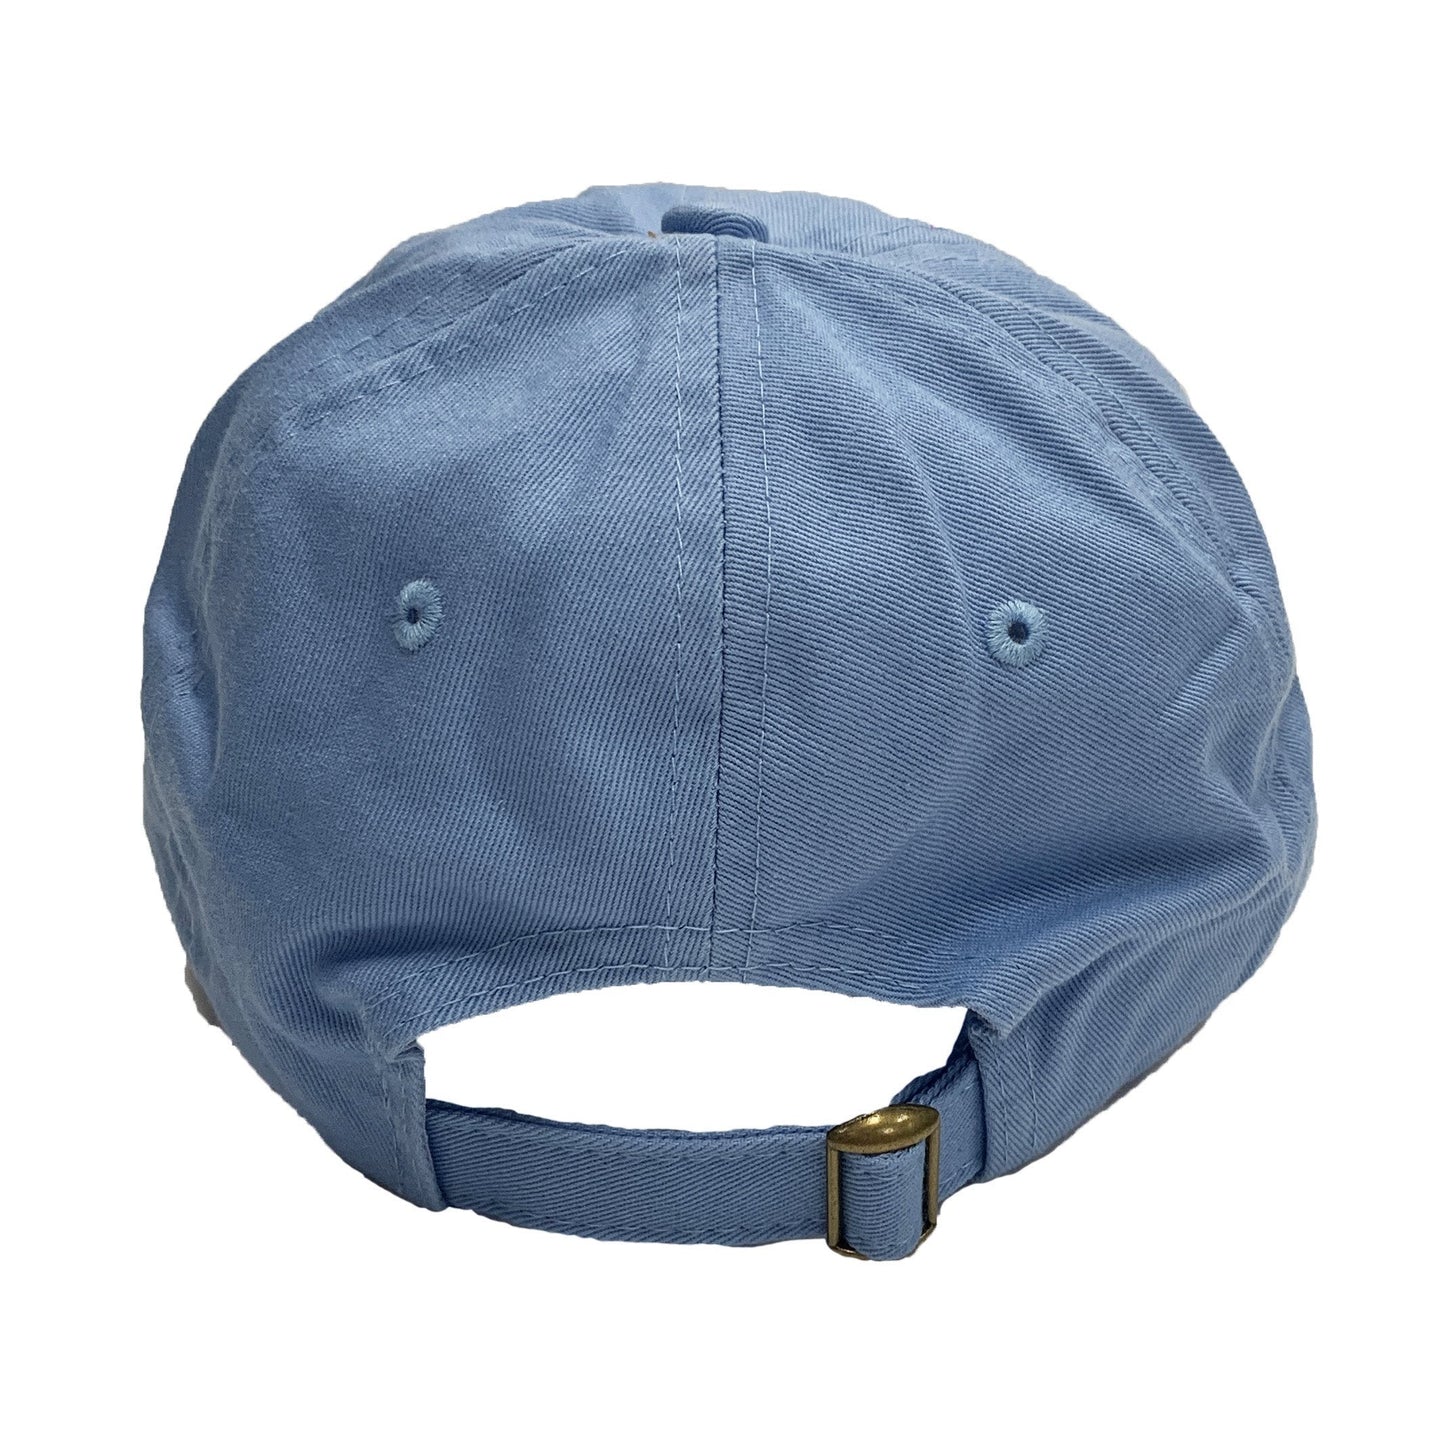 Salty (Sky Blue) / Baseball Hat - Route One Apparel